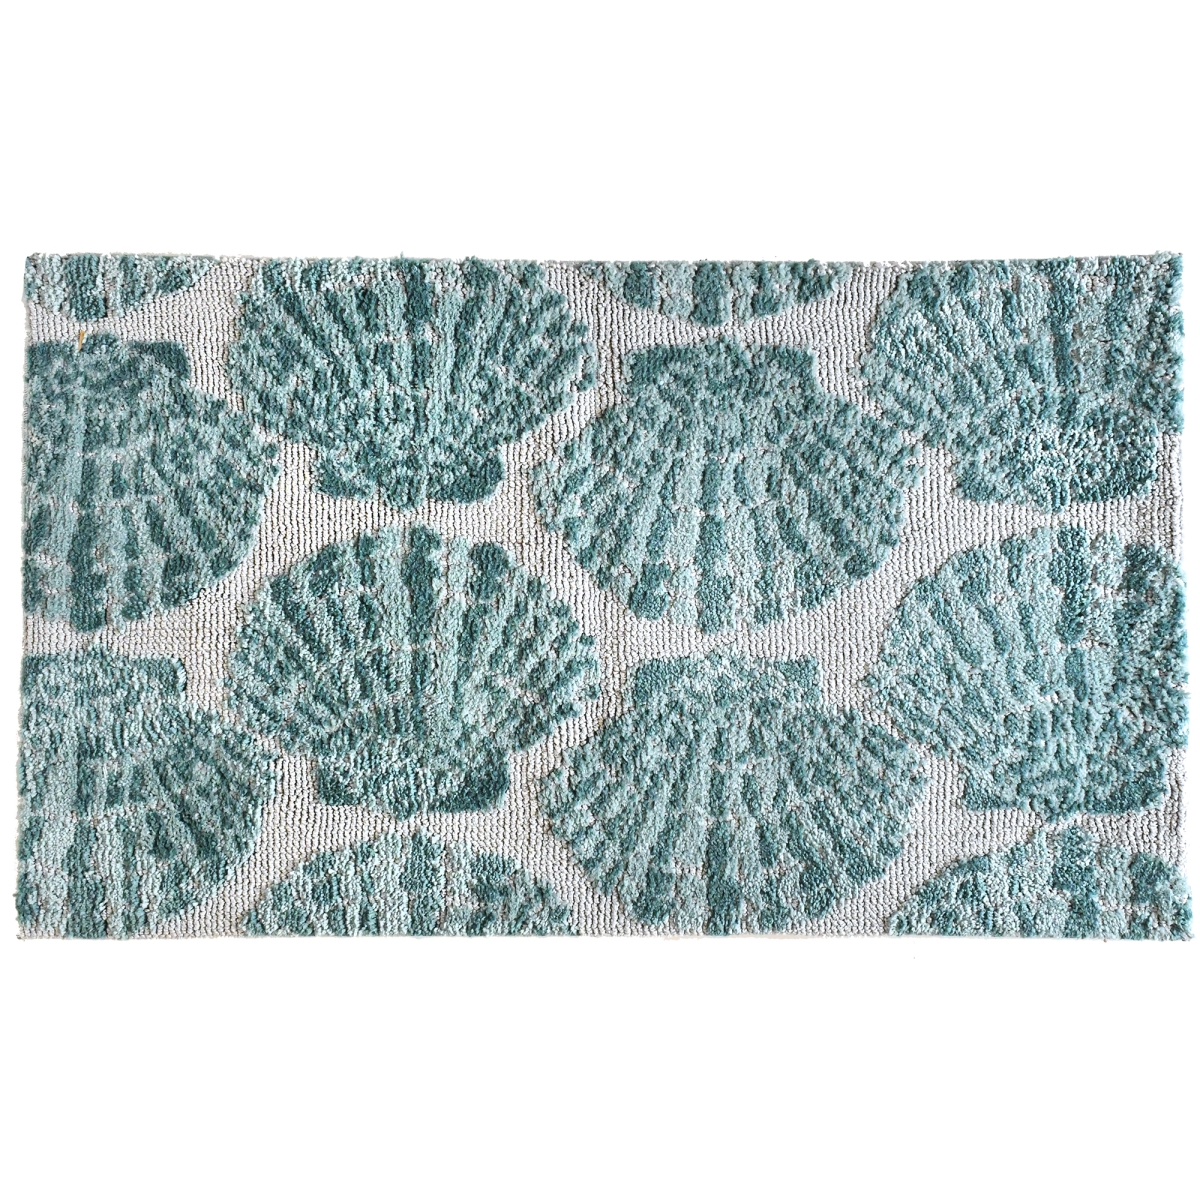 Ss-kr018b 21 X 33 In. Shells Indoor Accent Rug